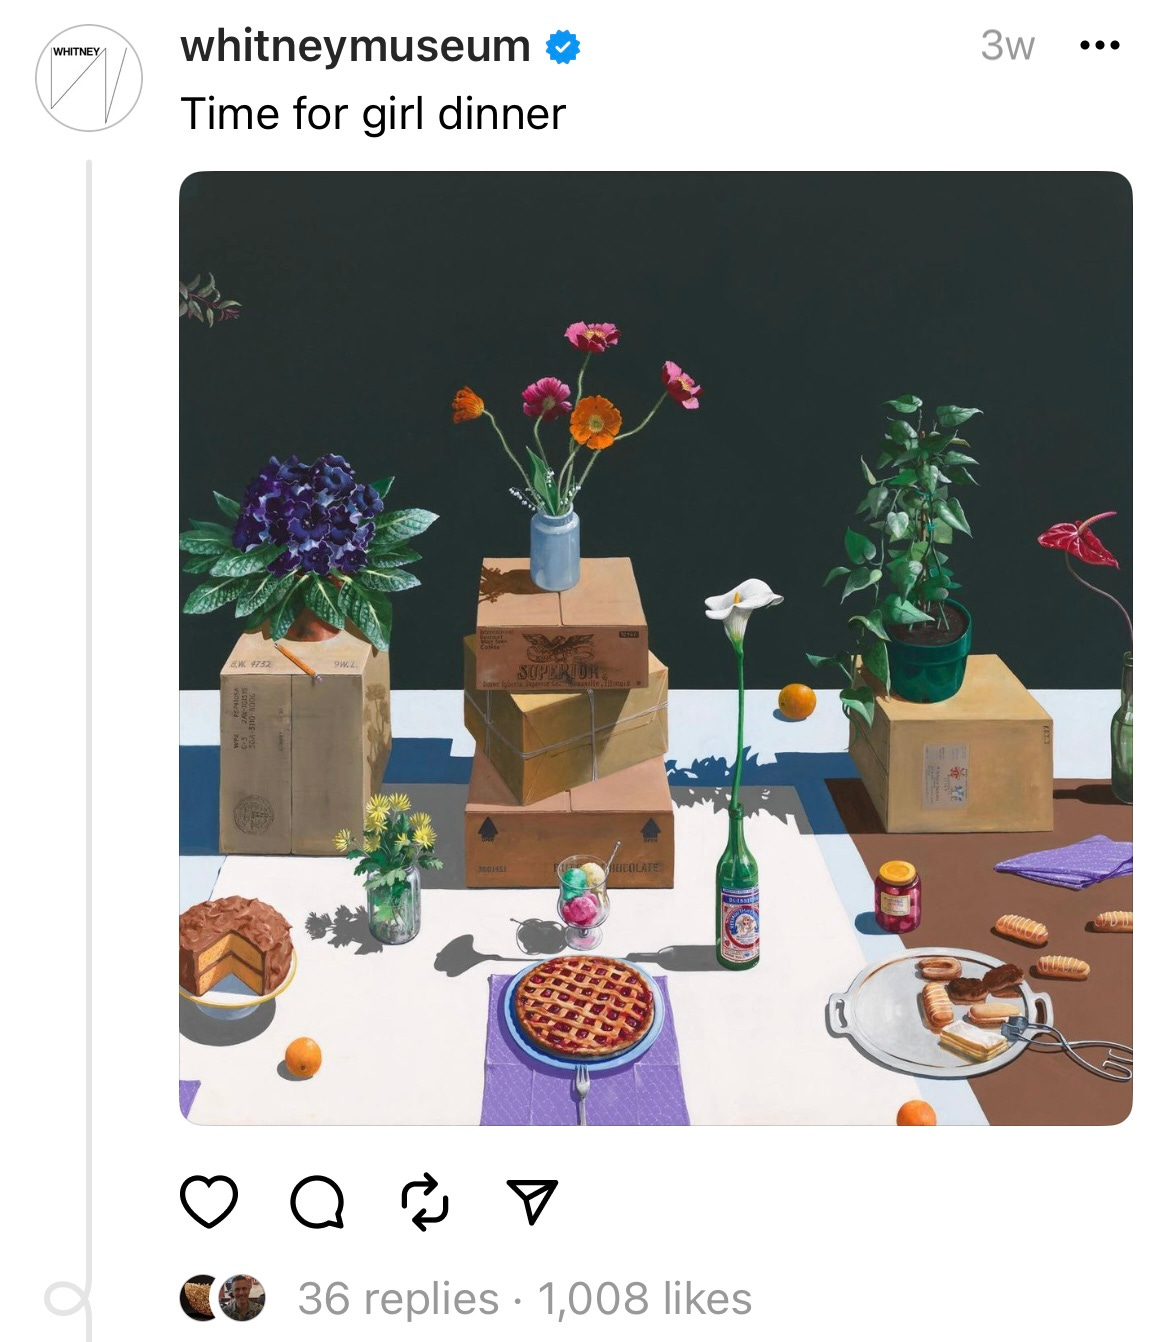 Post that says "Time for girl dinner" with a paining of little snacks and cakes on a table